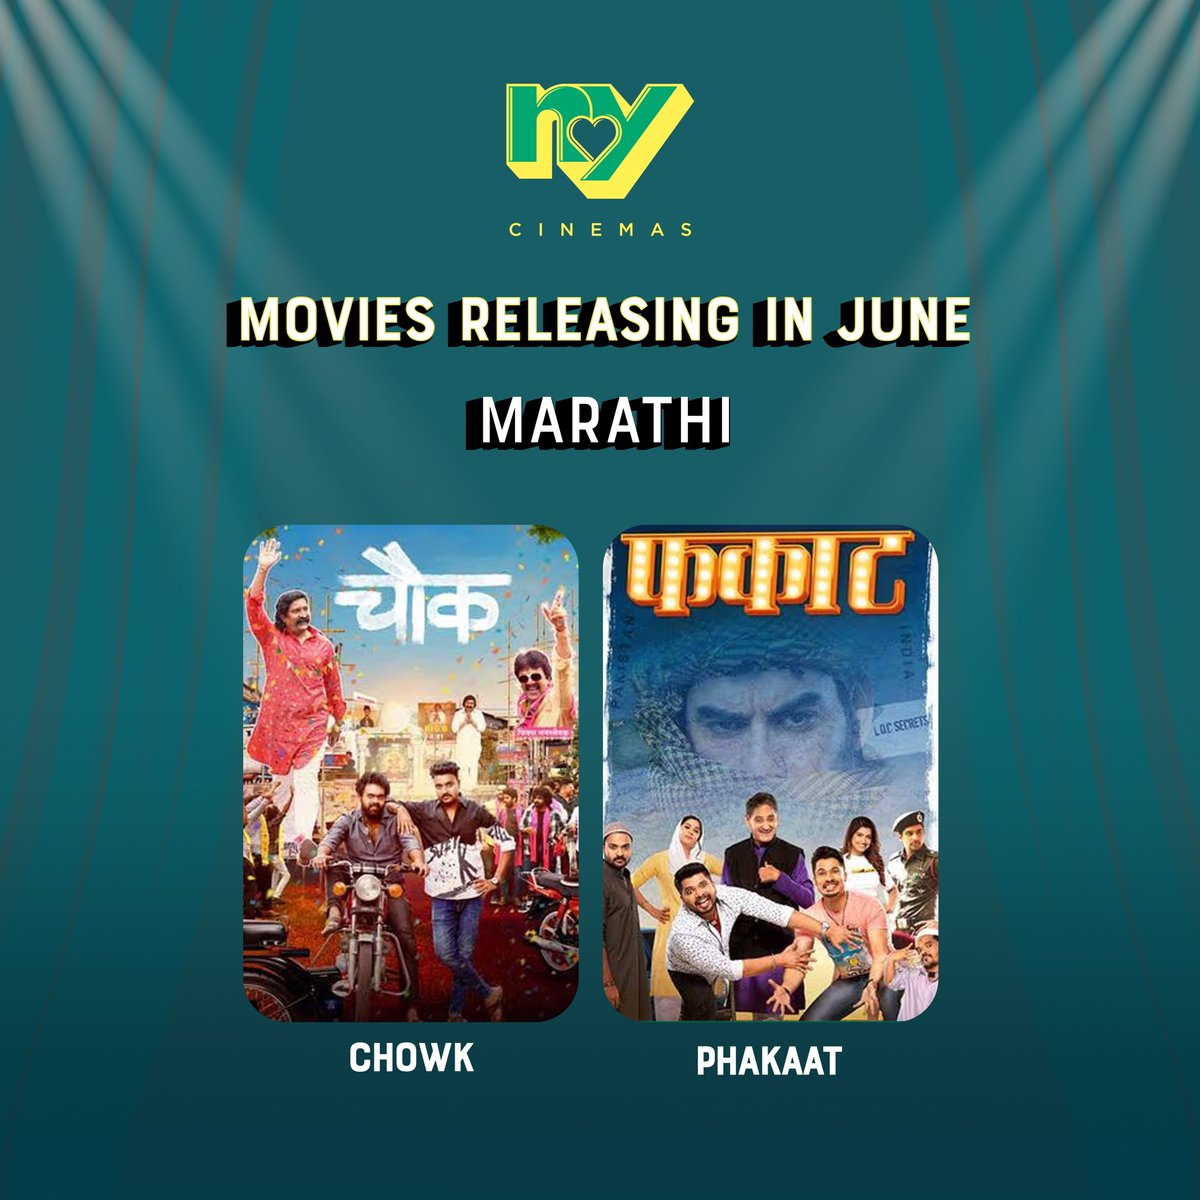 Another month of amazing movie line up for your complete family entertainment at #NYCinemas.

Which movie are you most excited for?

#june #movies #lineup #upcomingmovies #spidermanacrossthespiderverse #zarahatkezarabachke #transformersriseofthebeasts #theflash #adipurush